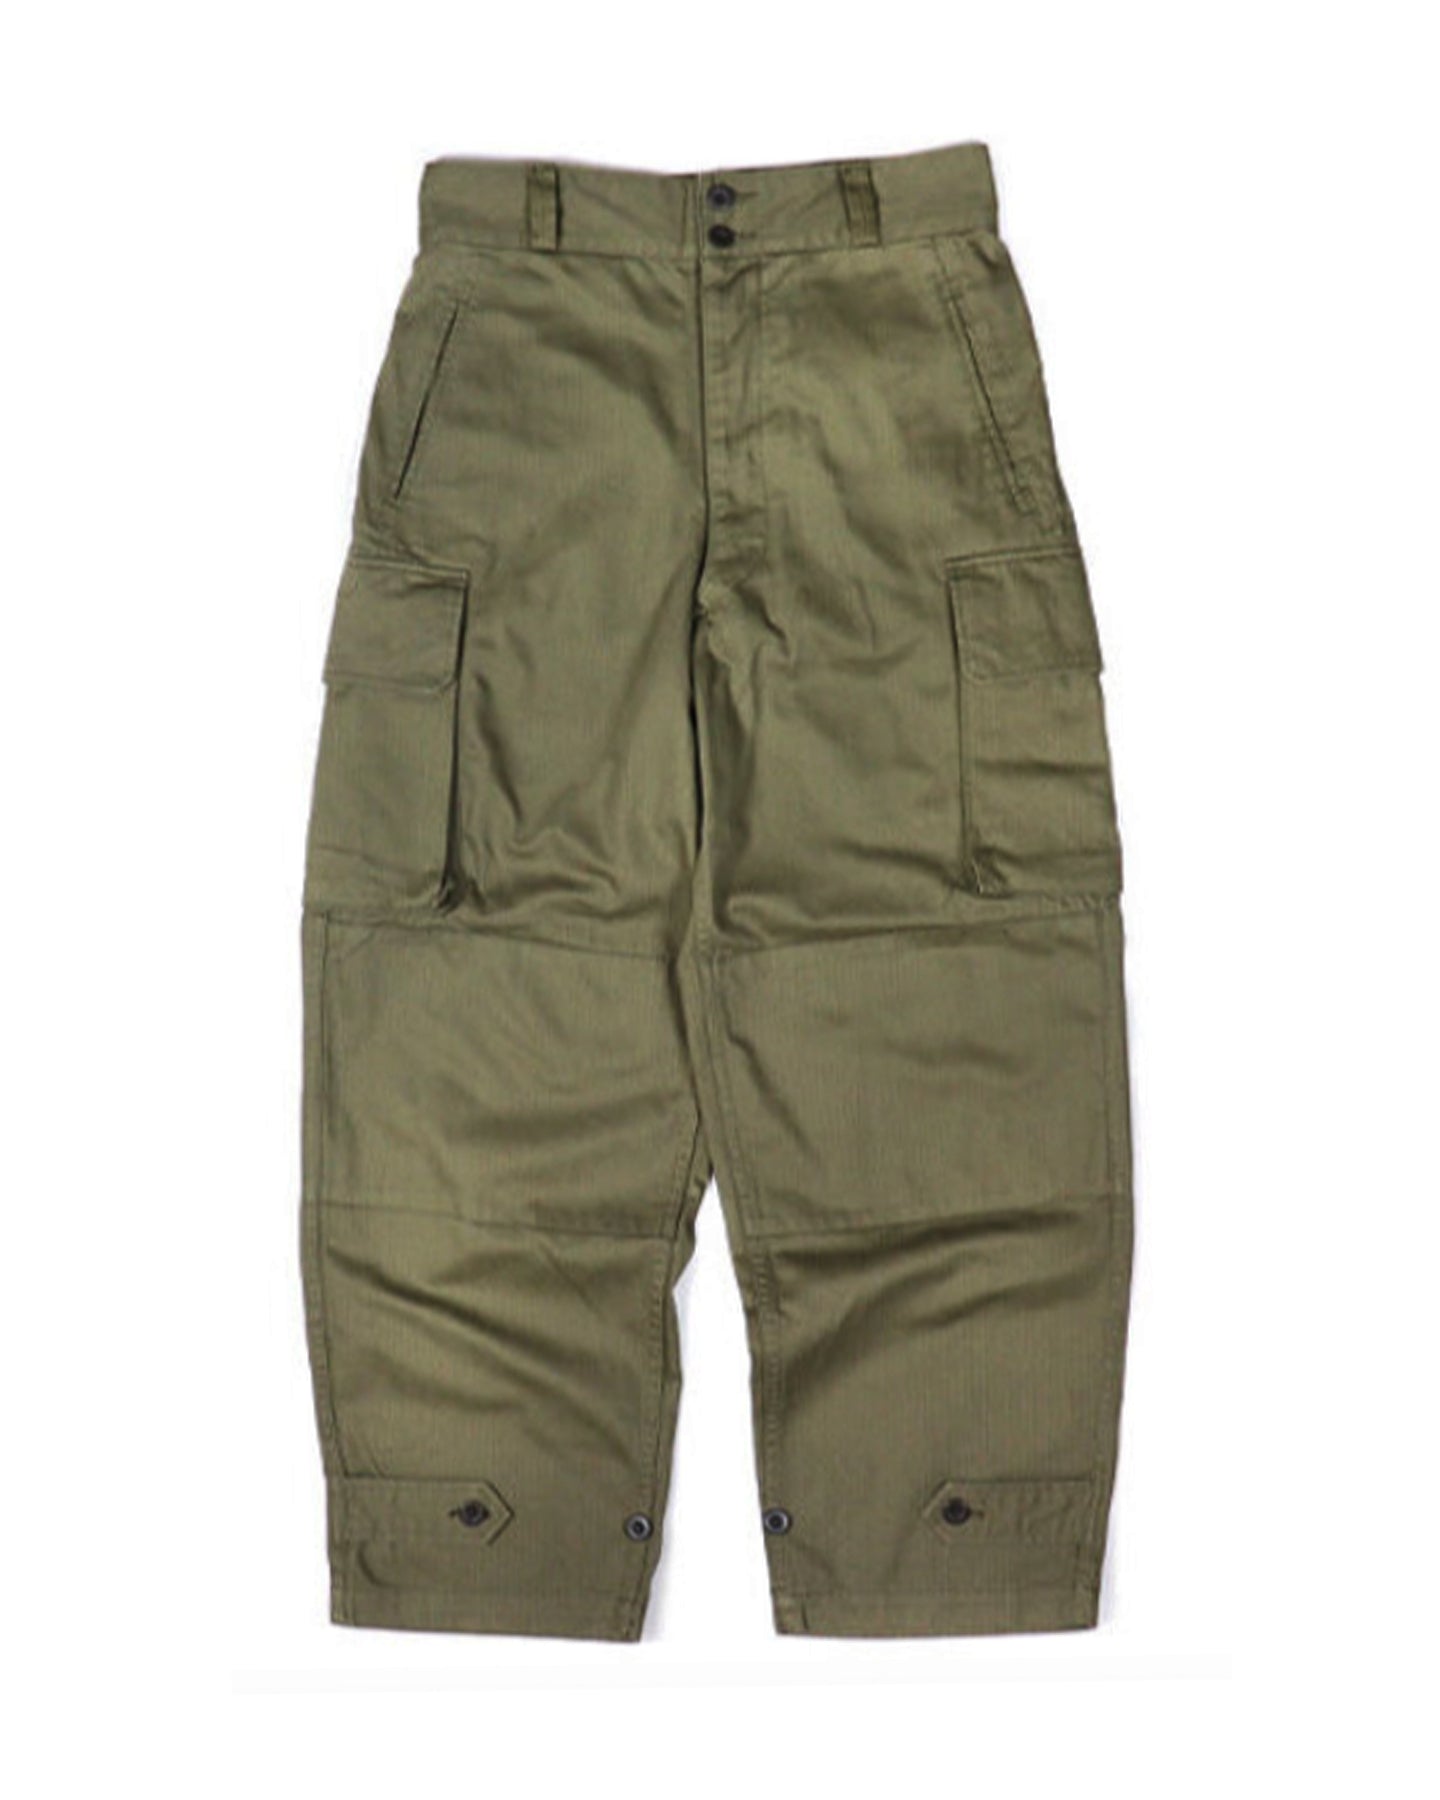 FRENCH M47 FIELD MILITARY PANTS -OLIVE – CRAFTMAN